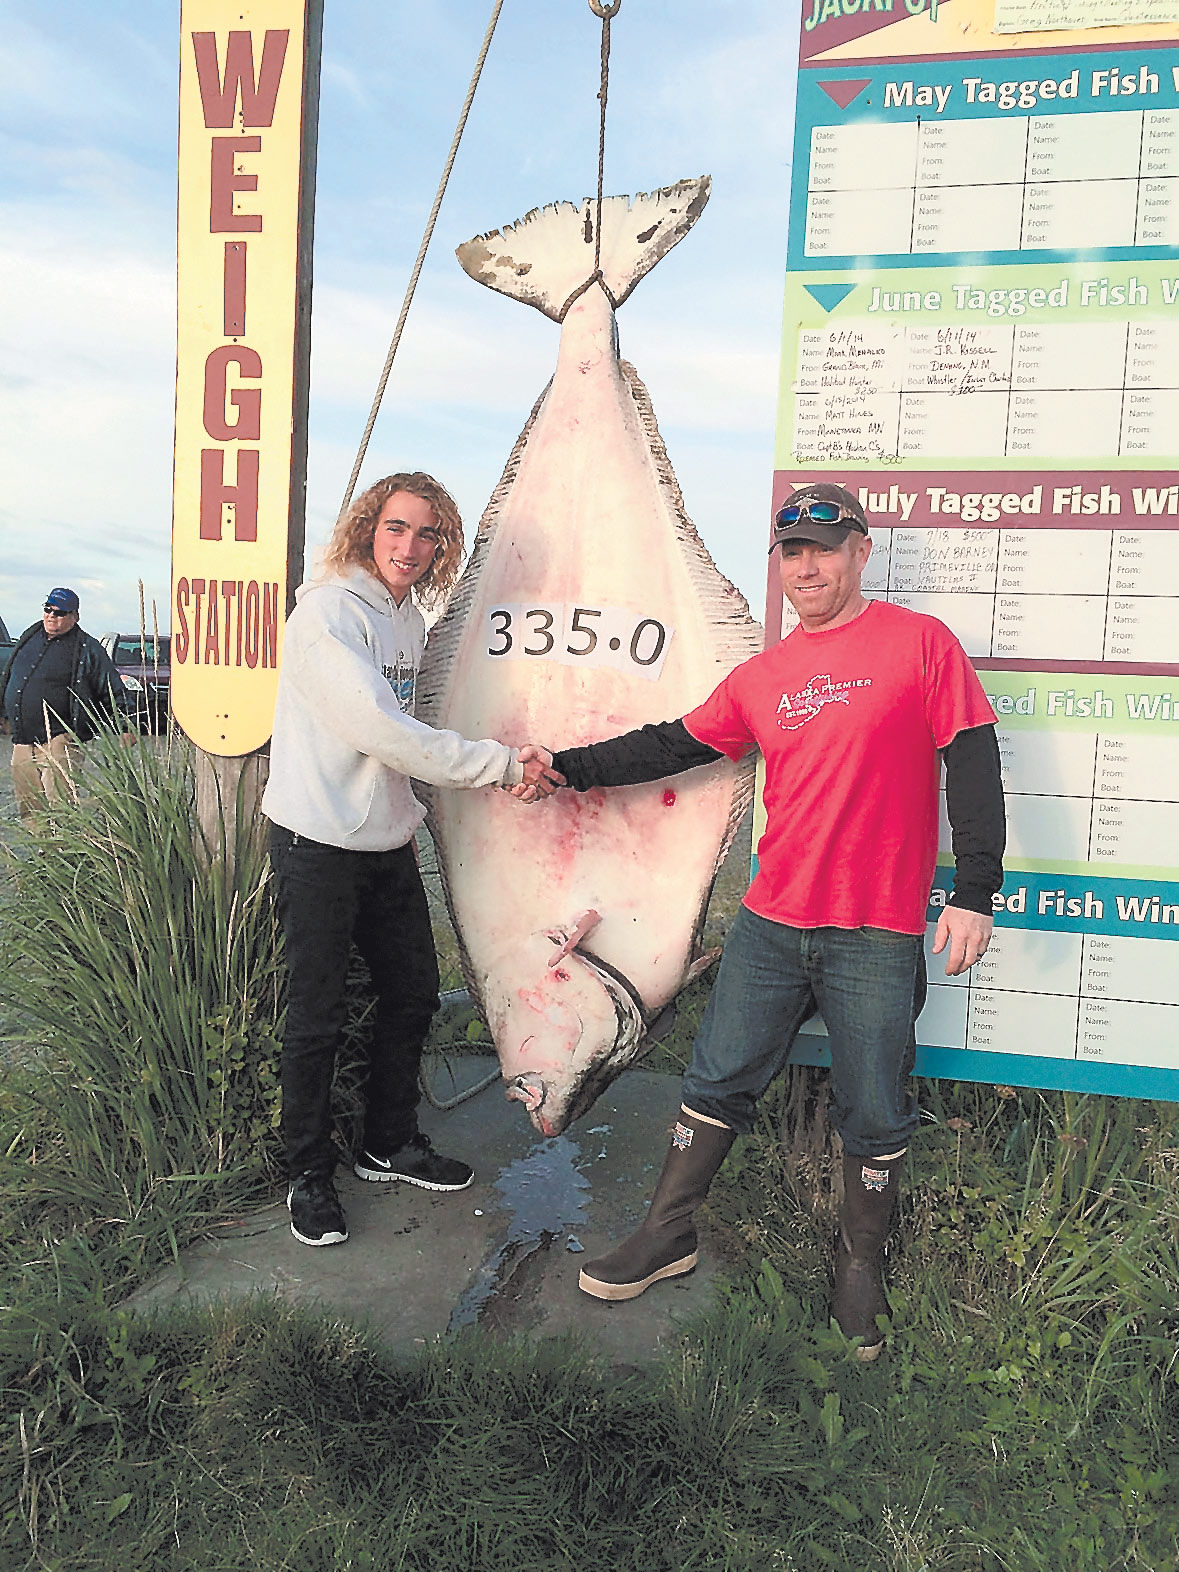 Jackson Hobb, 16, is the winner of the 2014 Homer Jackpot Halibut Derby. He caught the 335-pound halibut Aug. 19 while fishing with Capt. Travis Larson of Alaska Premier Sportfishing.